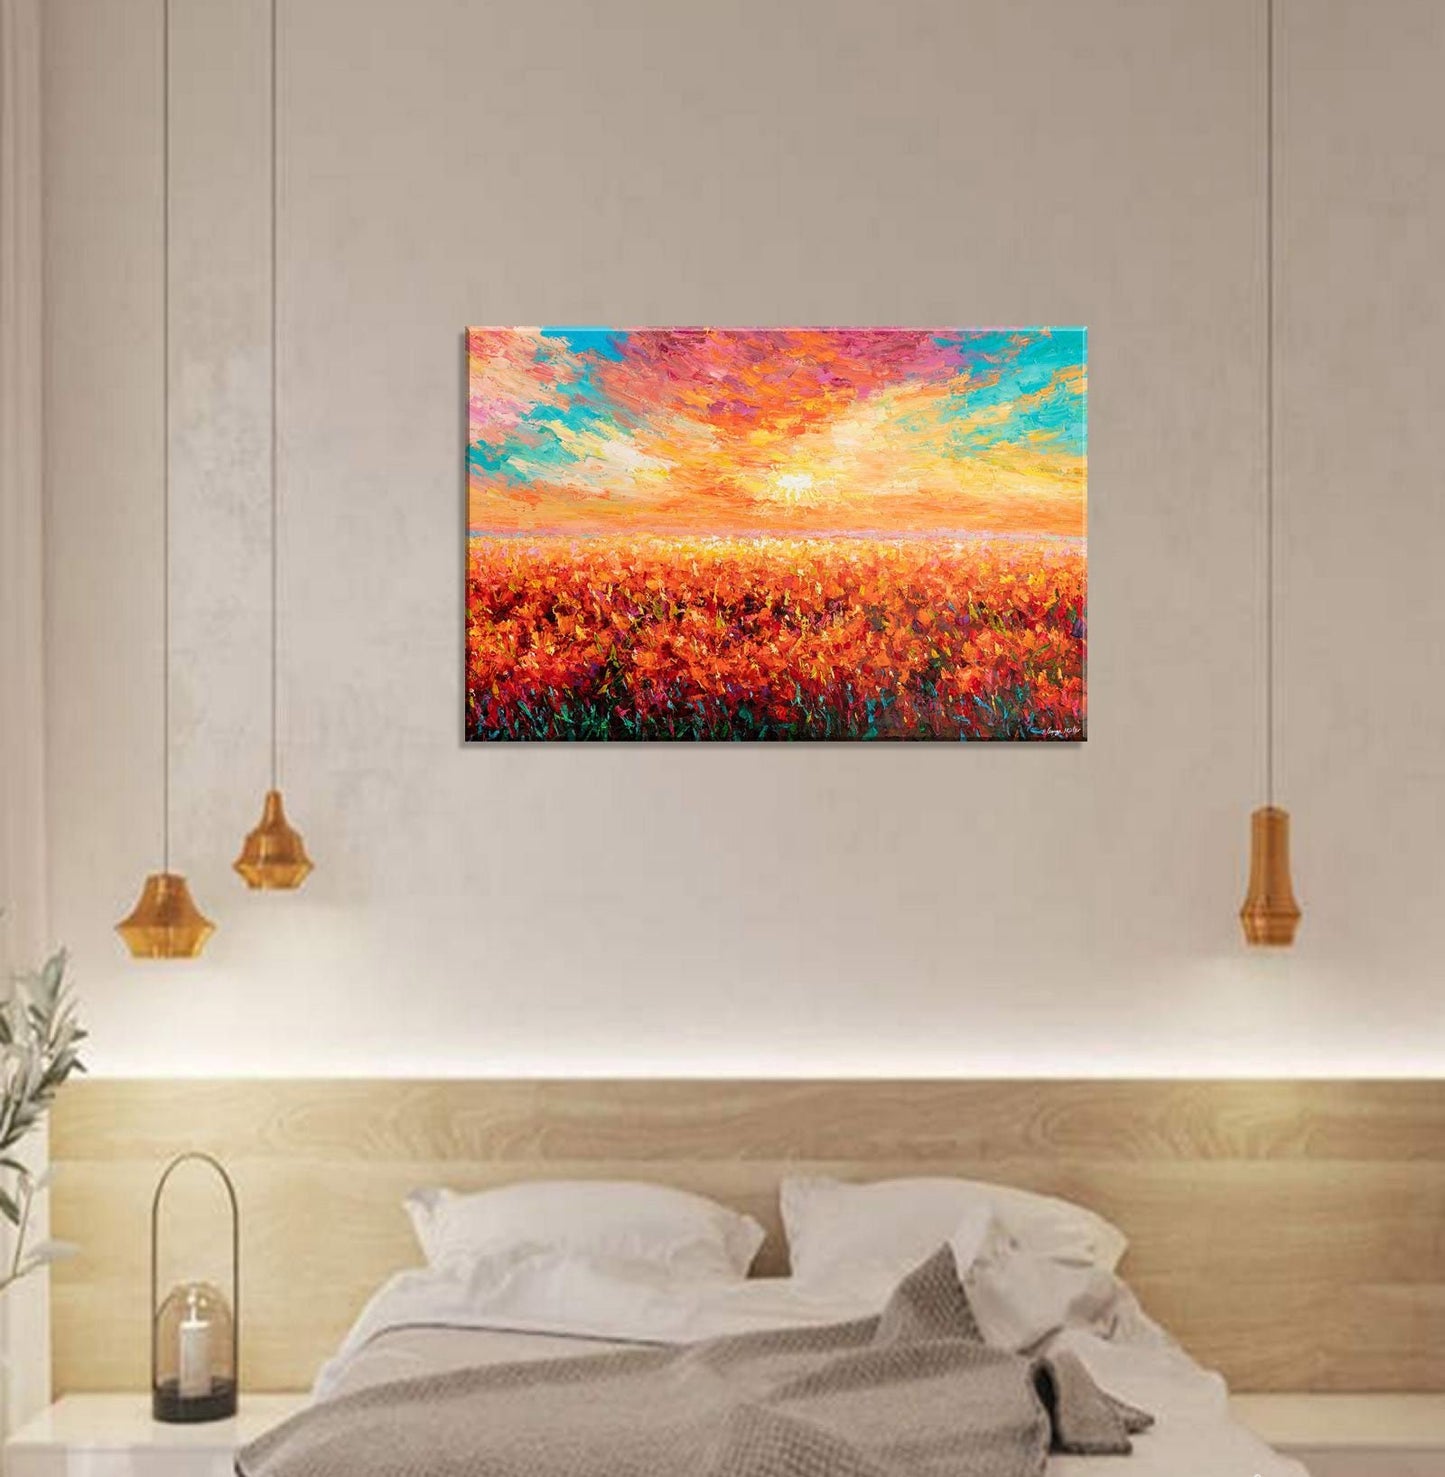 Landscape Painting, Oil Painting Tuscany Landscape, Large Abstract Painting, Abstract Painting, Large Wall Art Canvas, Modern Art